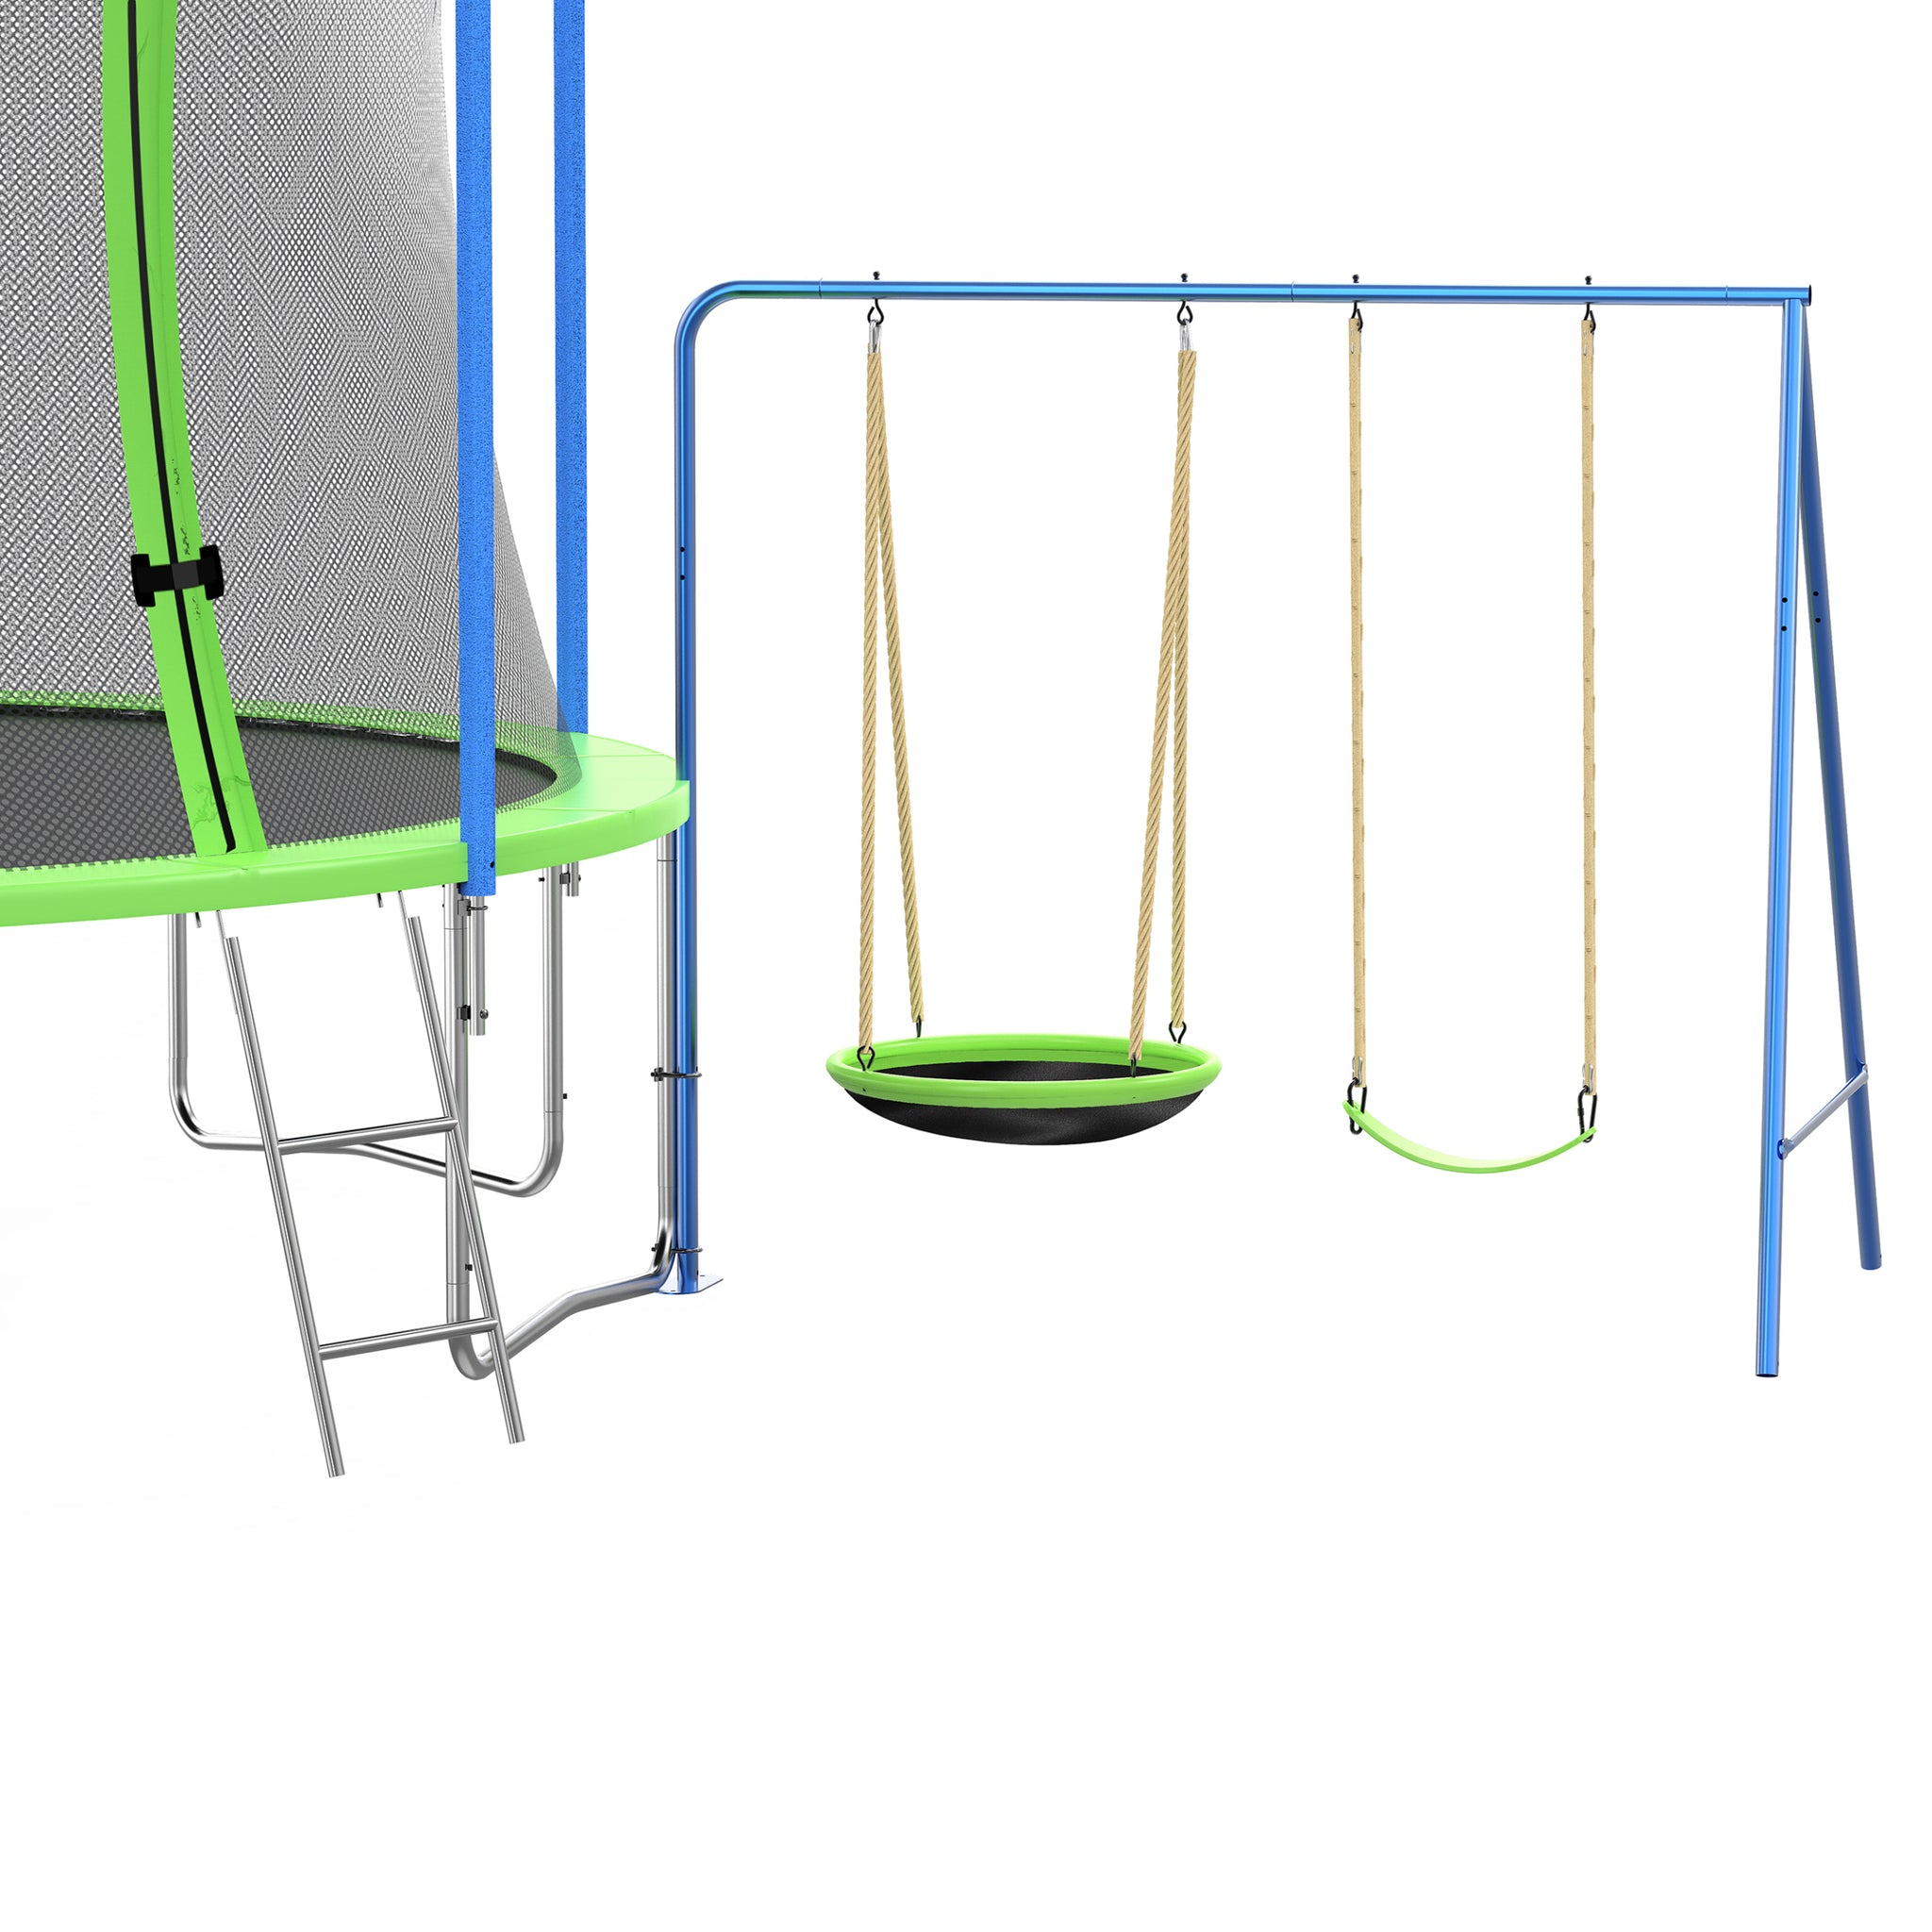 14FT Trampoline with Slide and Swings, ASTM Approved green-metal